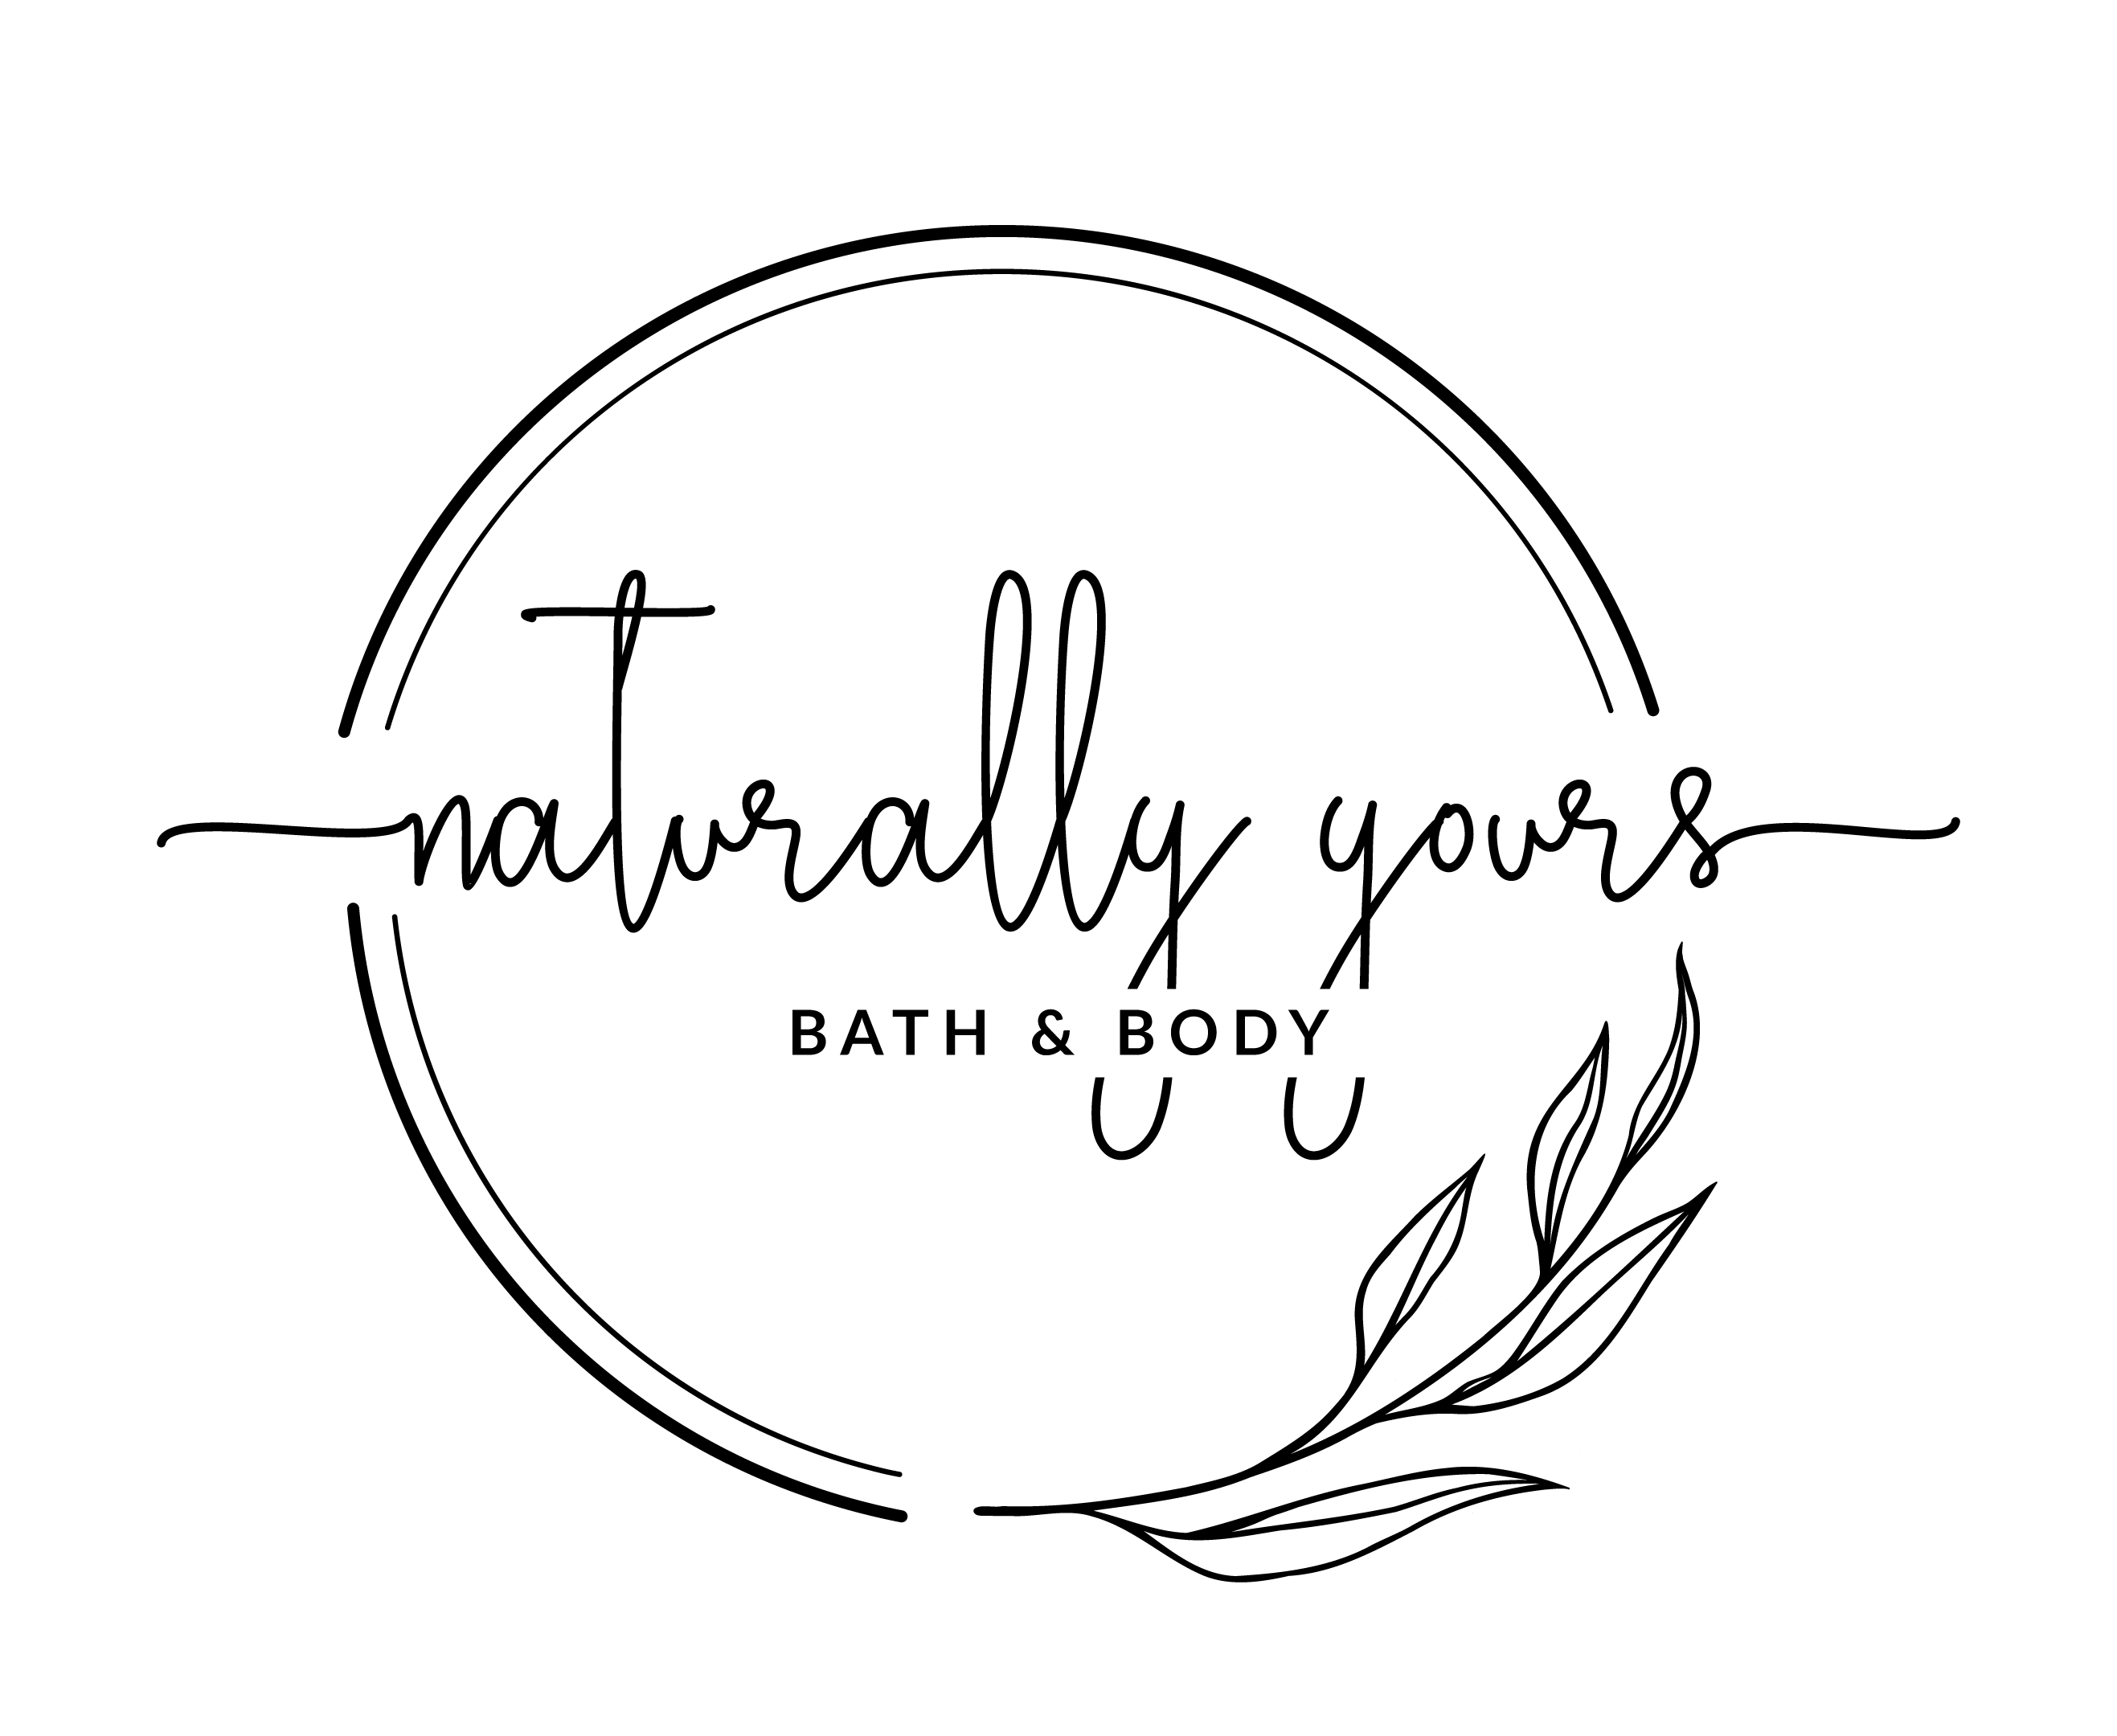 Naturally Yours Bath & Body